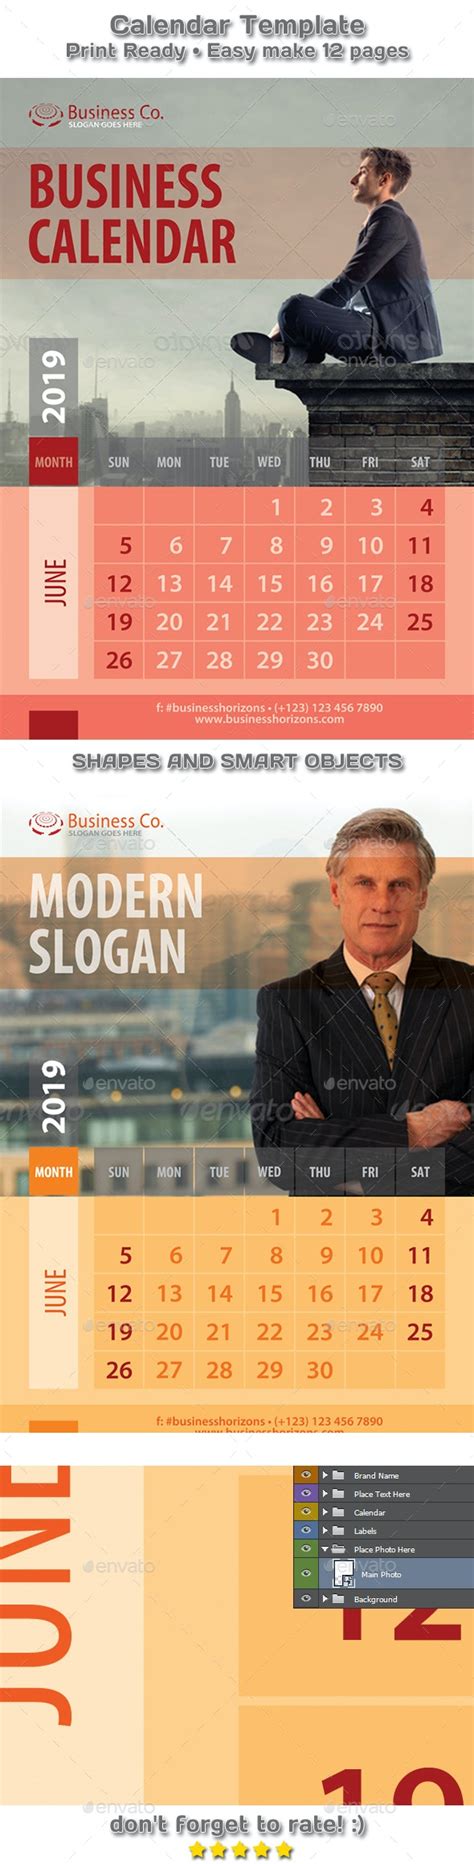 Modern Business Style Calendar 2019 2020 Template By 21min Graphicriver